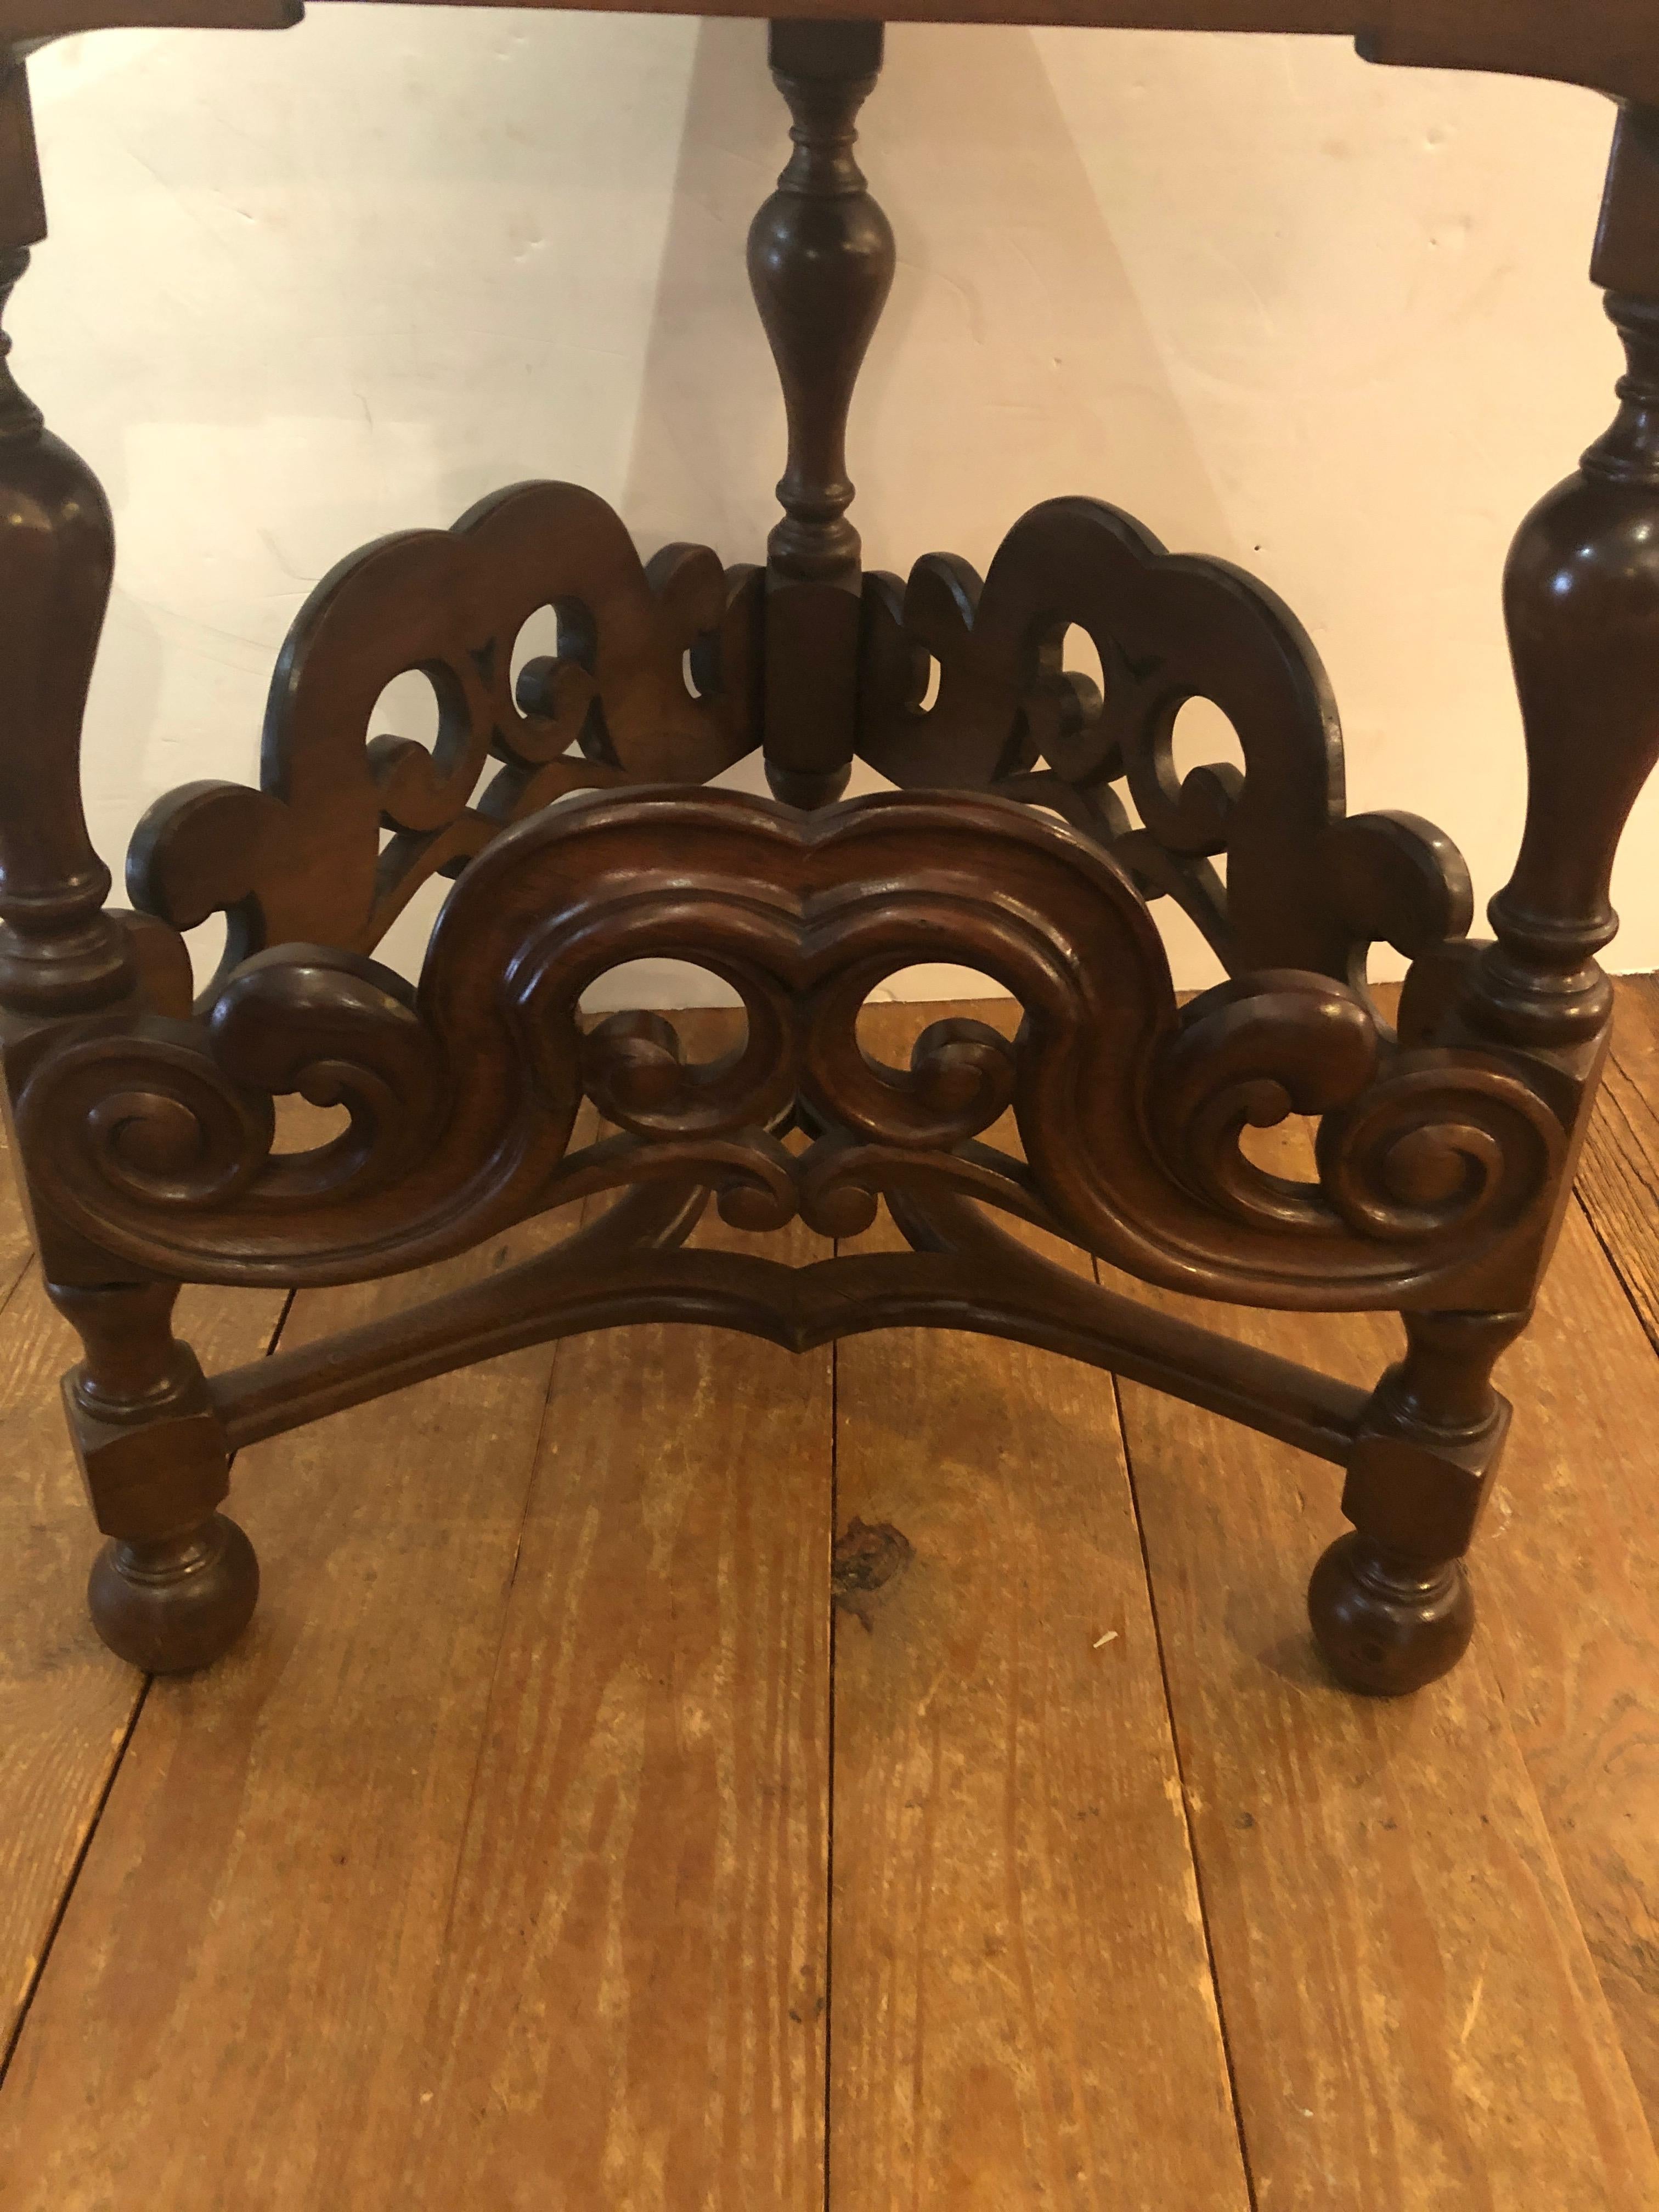 Antique English walnut end table in a wonderful triangular shape with gorgeous grain having fancy turned legs and curlicue stretchers.